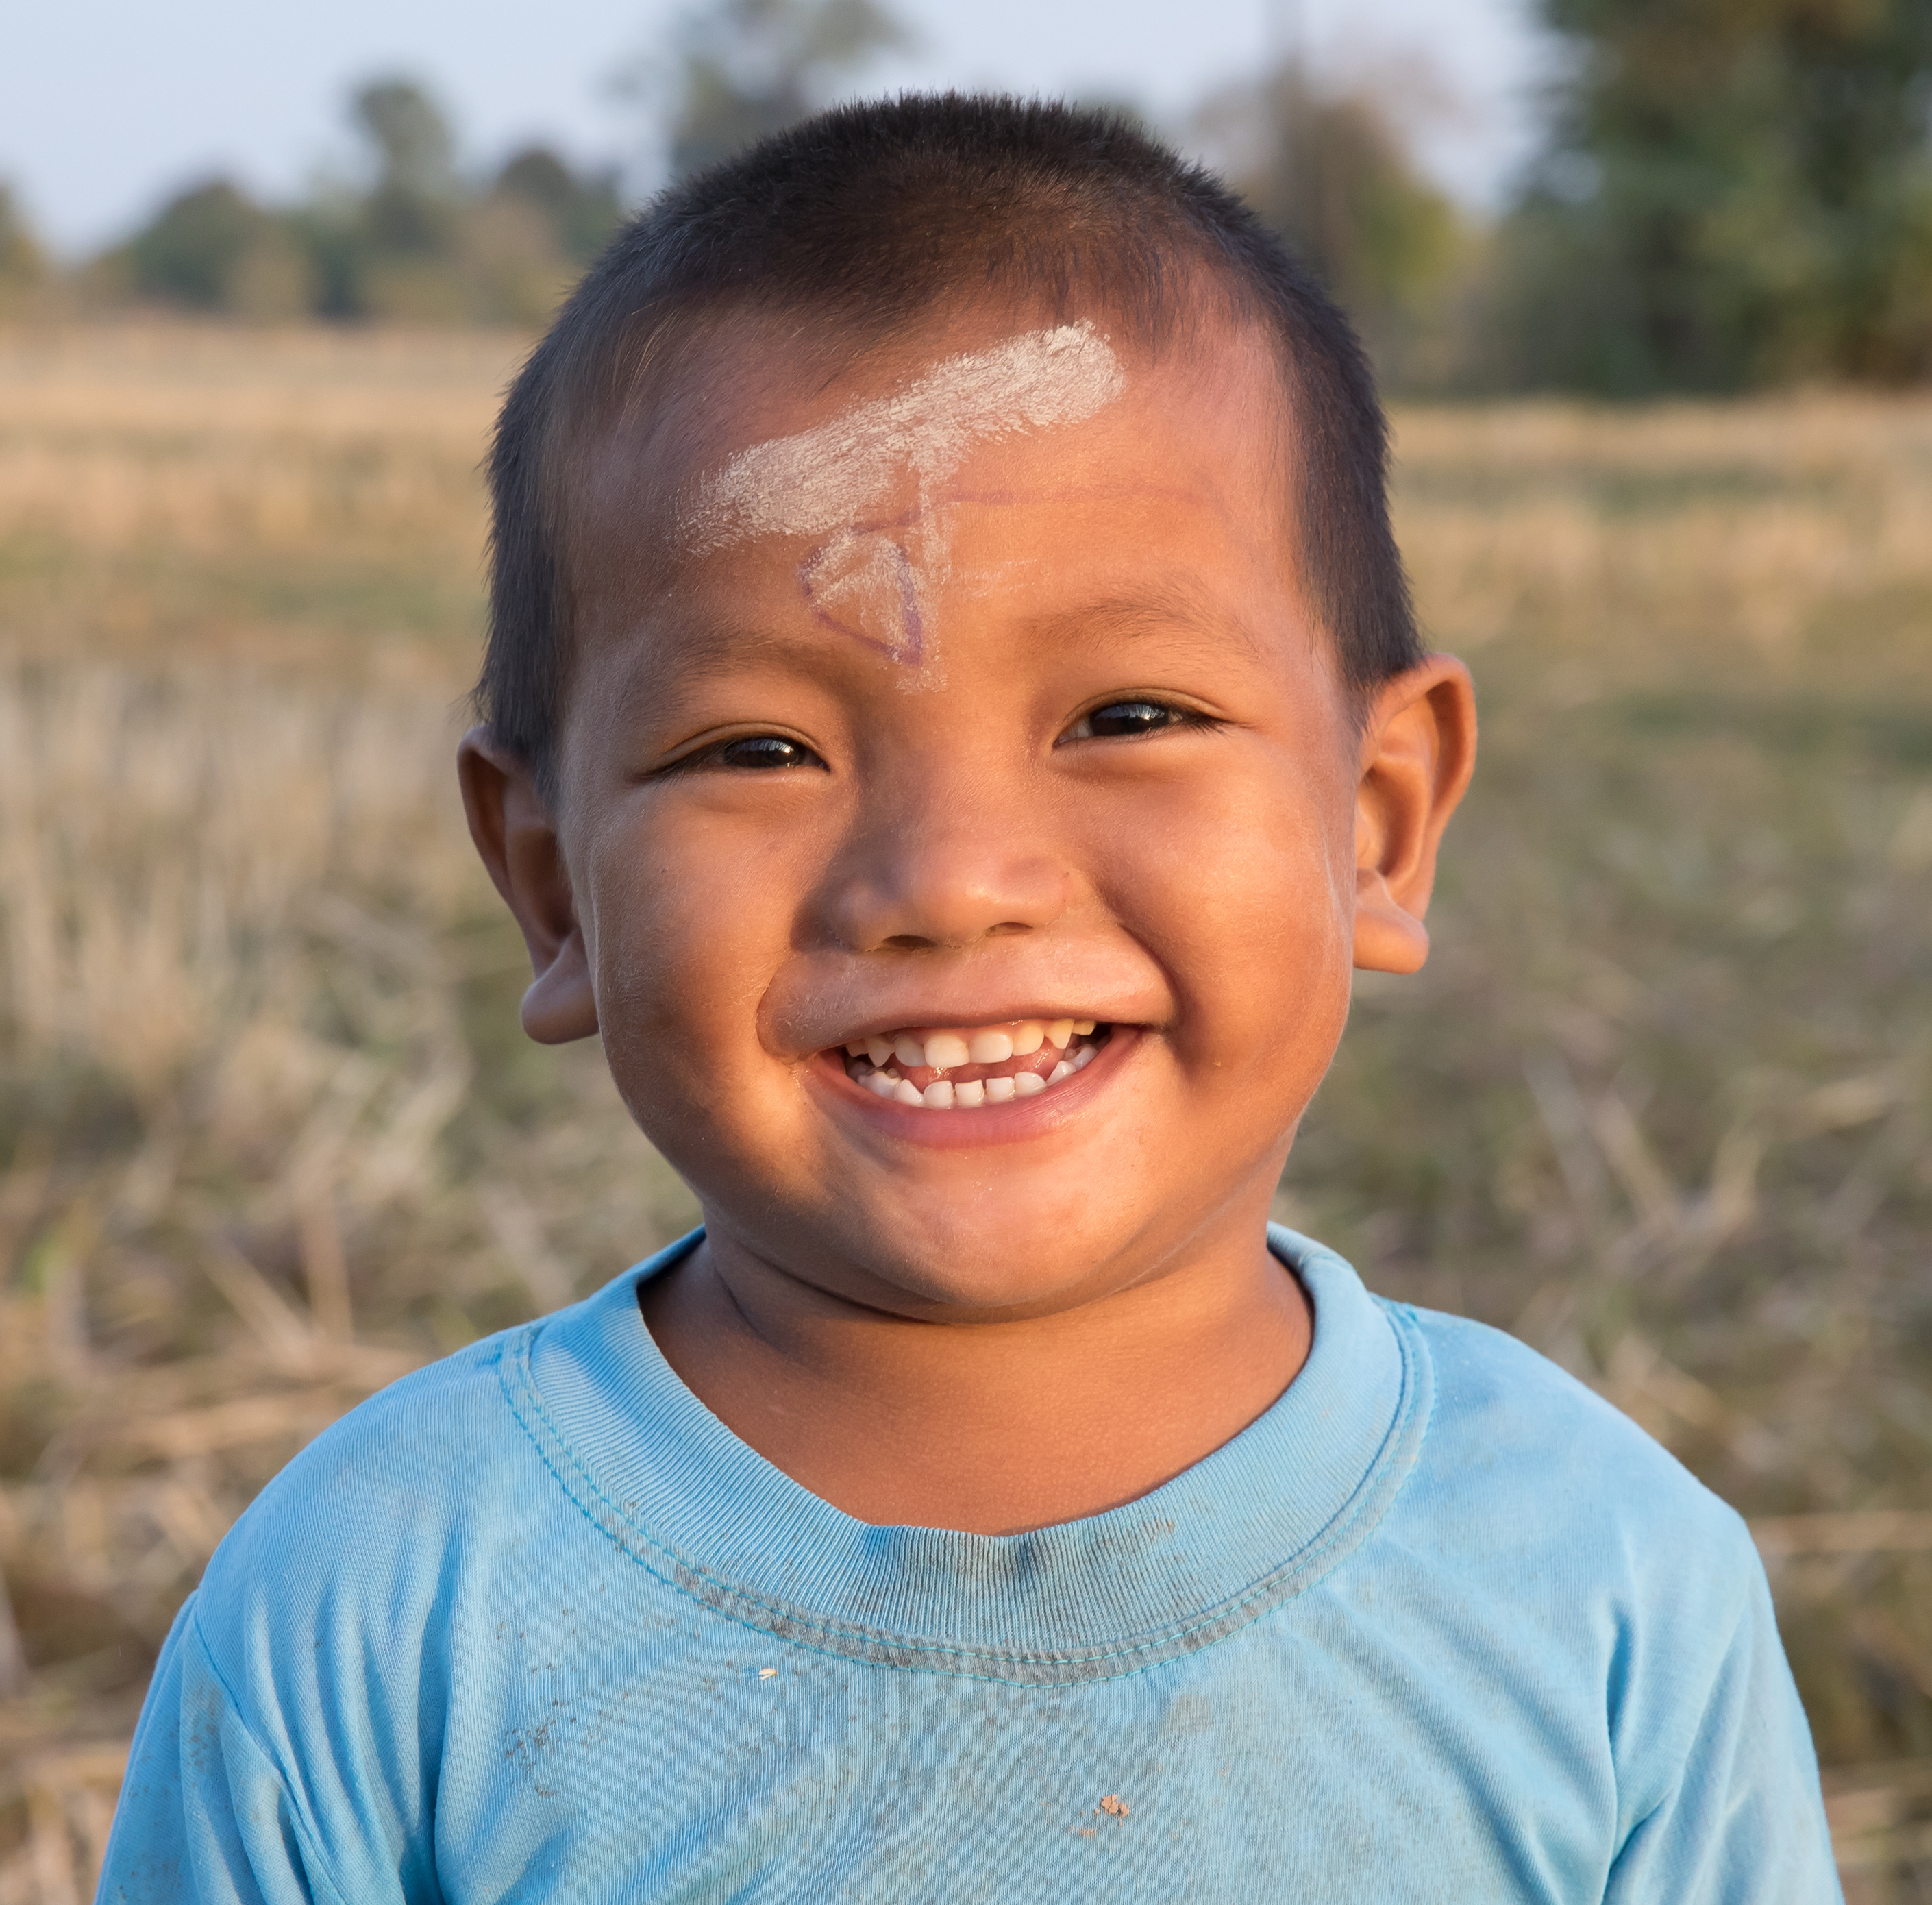 File:Little boy of Laos laughing.jpg - Wikimedia Commons